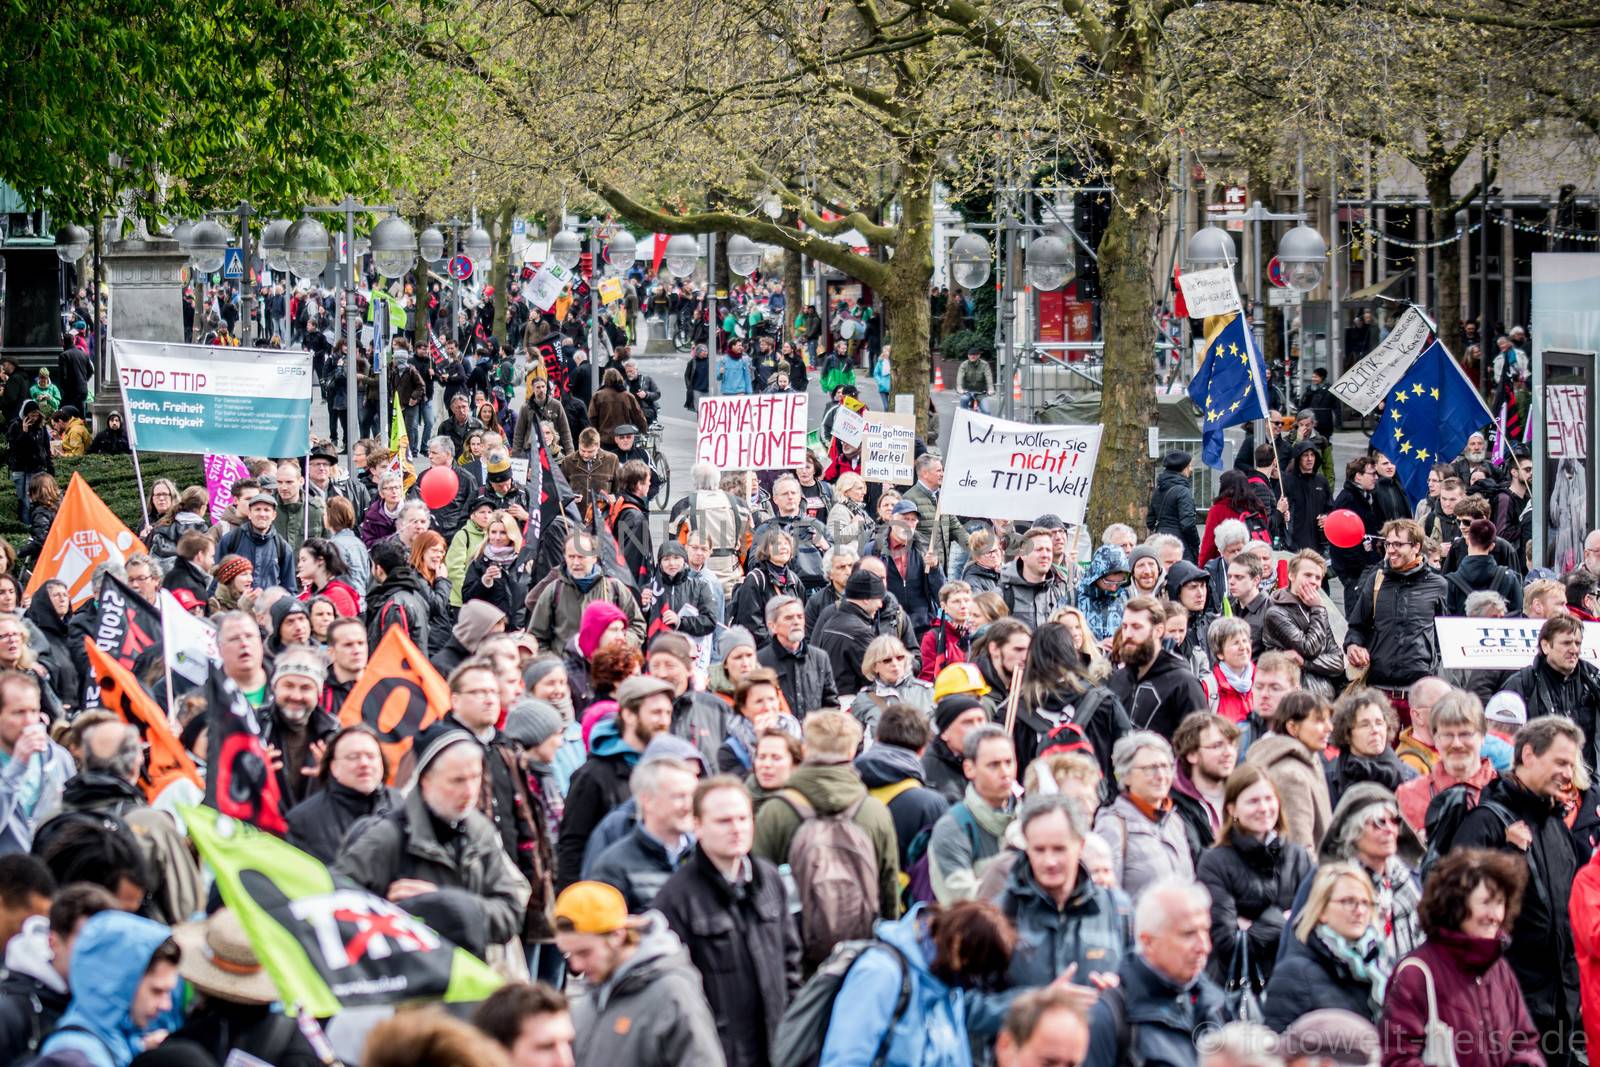 GERMANY, Hanover: Thousands attend a rally in Hanover, Germany against the Trans-Atlantic Trade and Investment Partnership (TTIP) on April 23, 2016 ahead of US President Barack Obama's visit. Obama and German Chancellor Angela Merkel are set to open the world's largest industrial trade fair in Hanover on April 24, and leaders will reportedly congregate in New York City the following day to continue talks on TTIP.